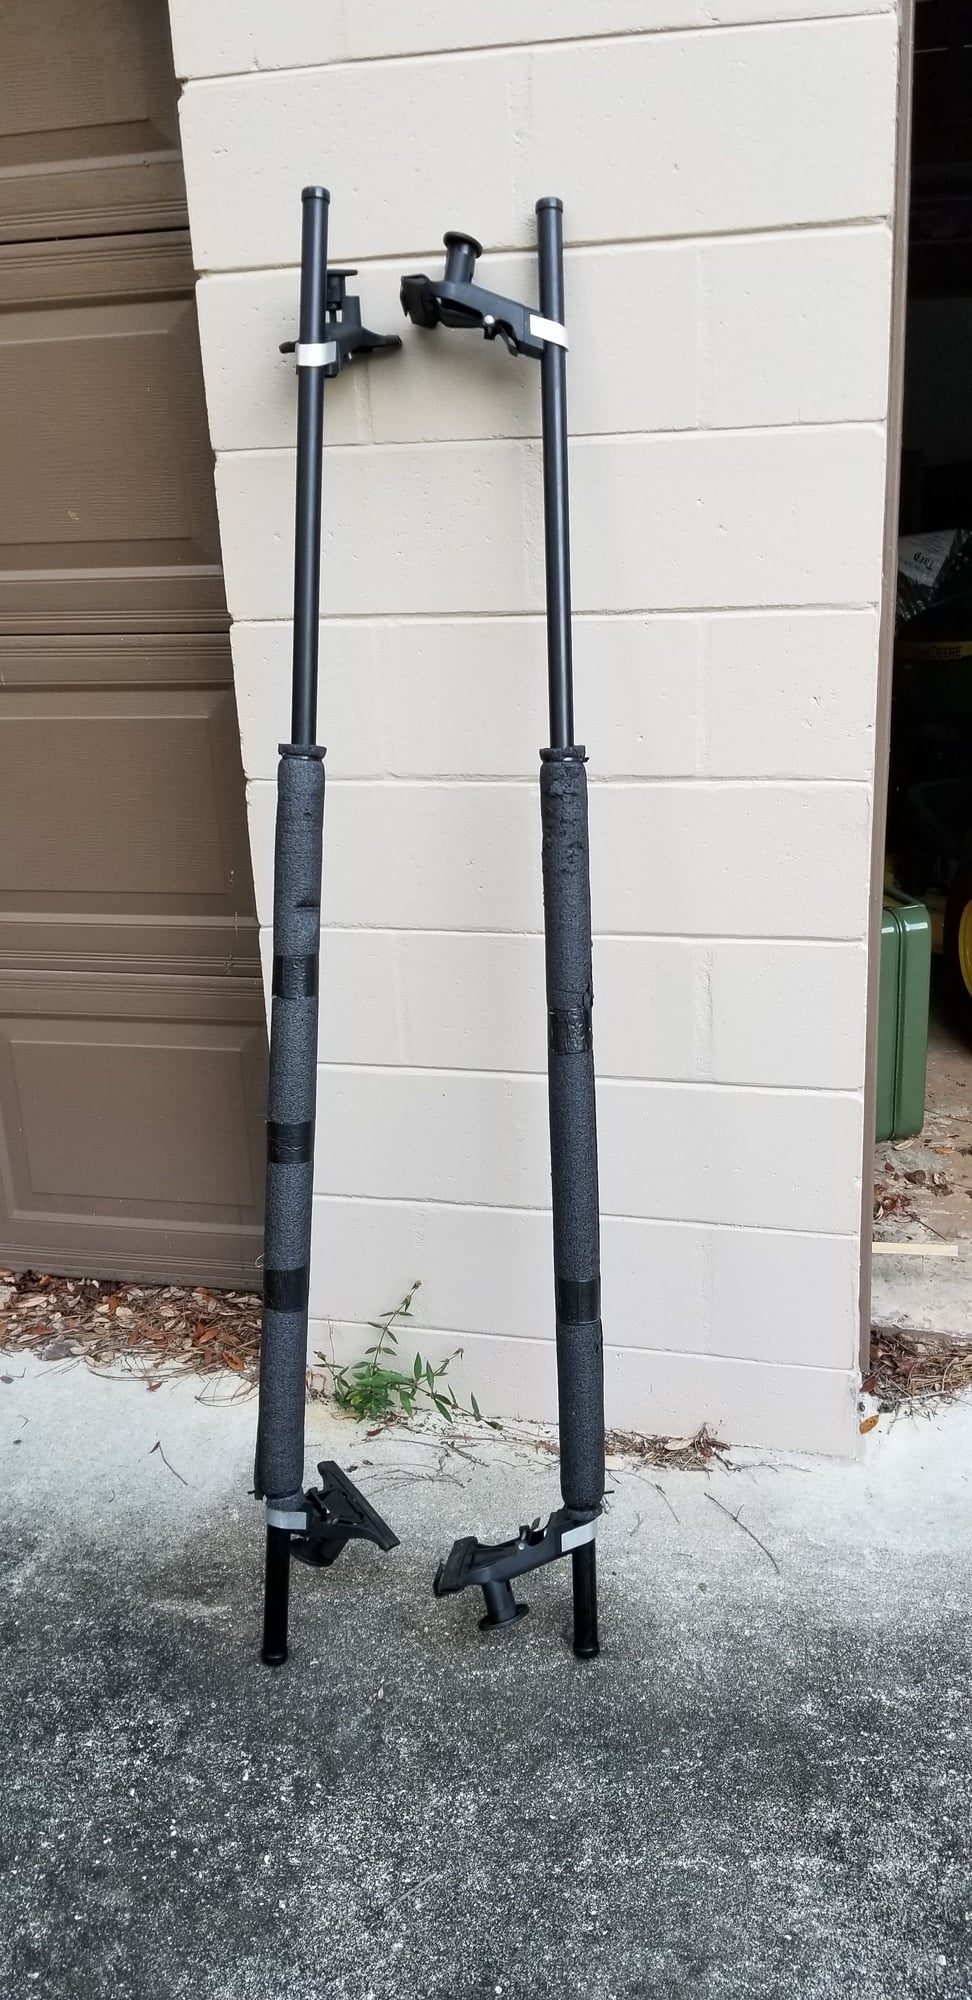 Exterior Body Parts - Yakima gutter mounted roof rack - Used - 2007 to 2019 Jeep Wrangler - Debary, FL 32713, United States